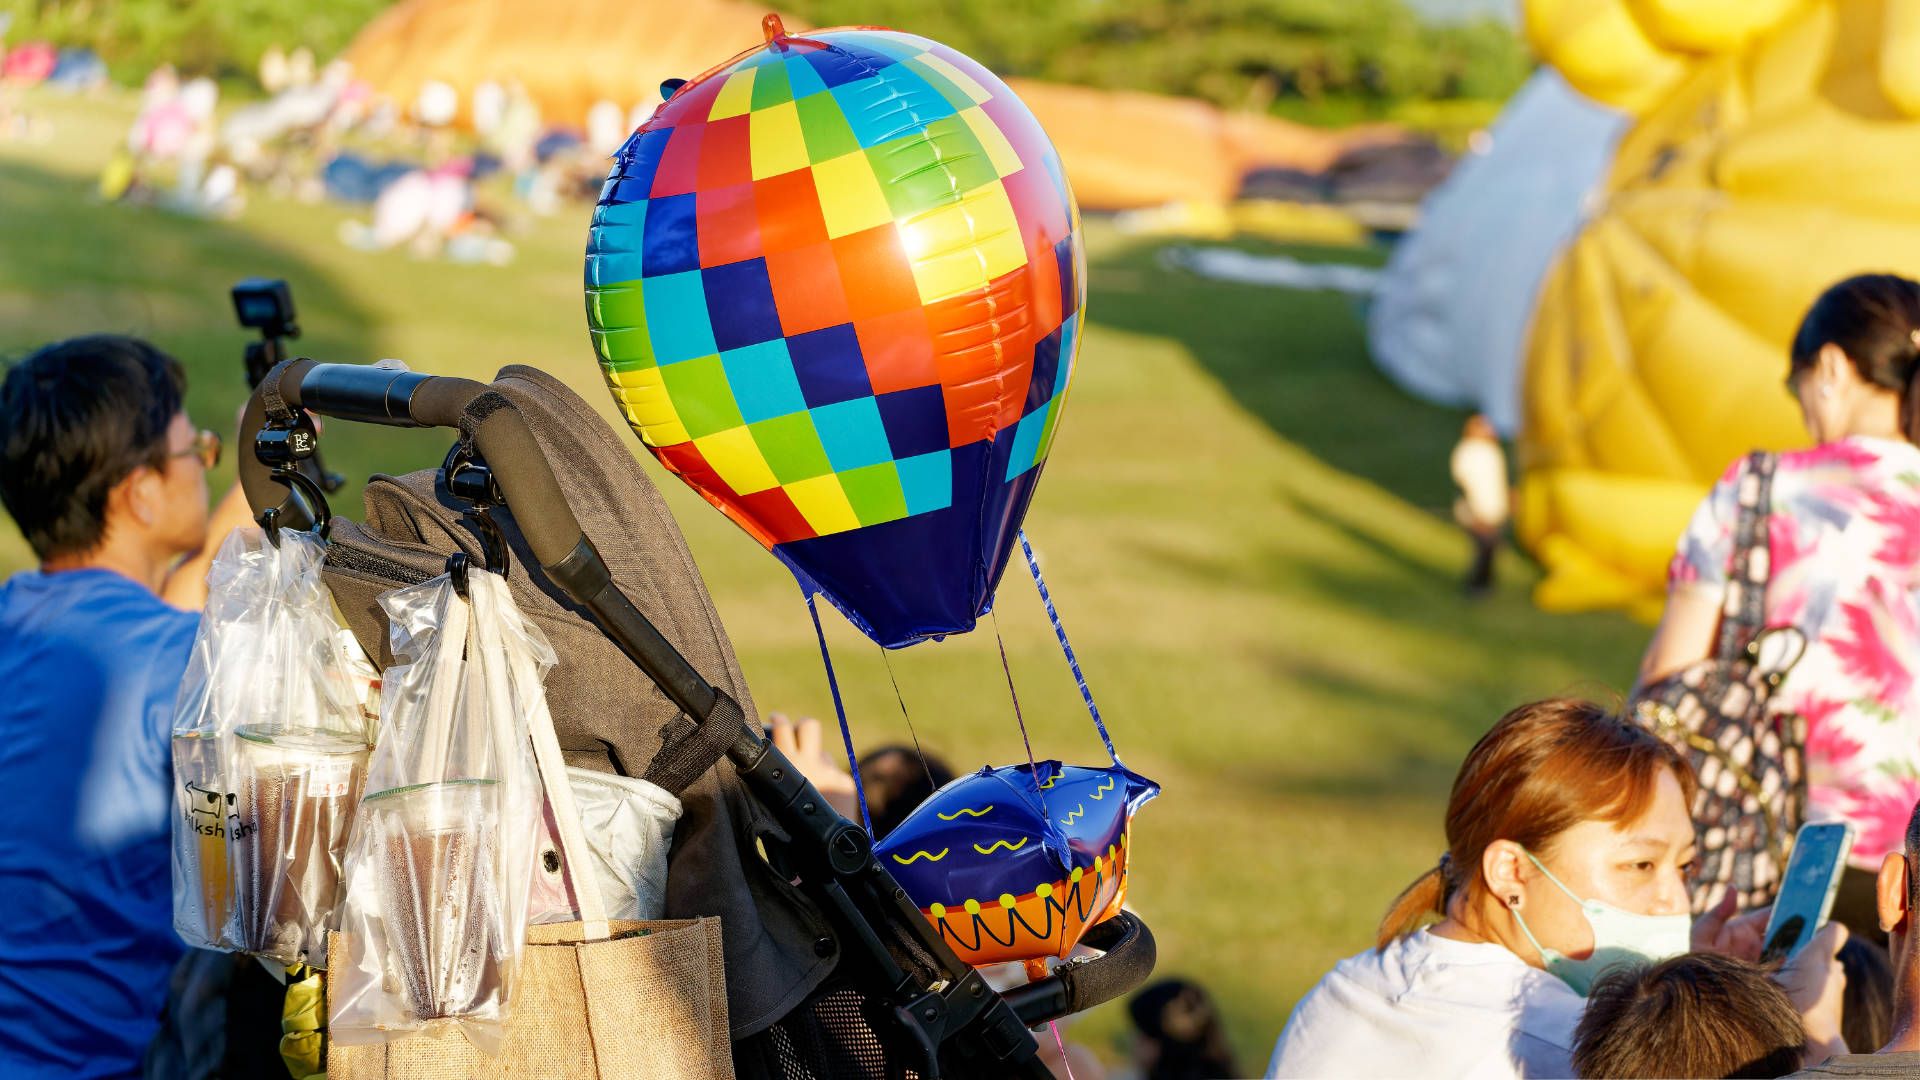 An inflated toy balloon attached to a baby stroller in the crowd.